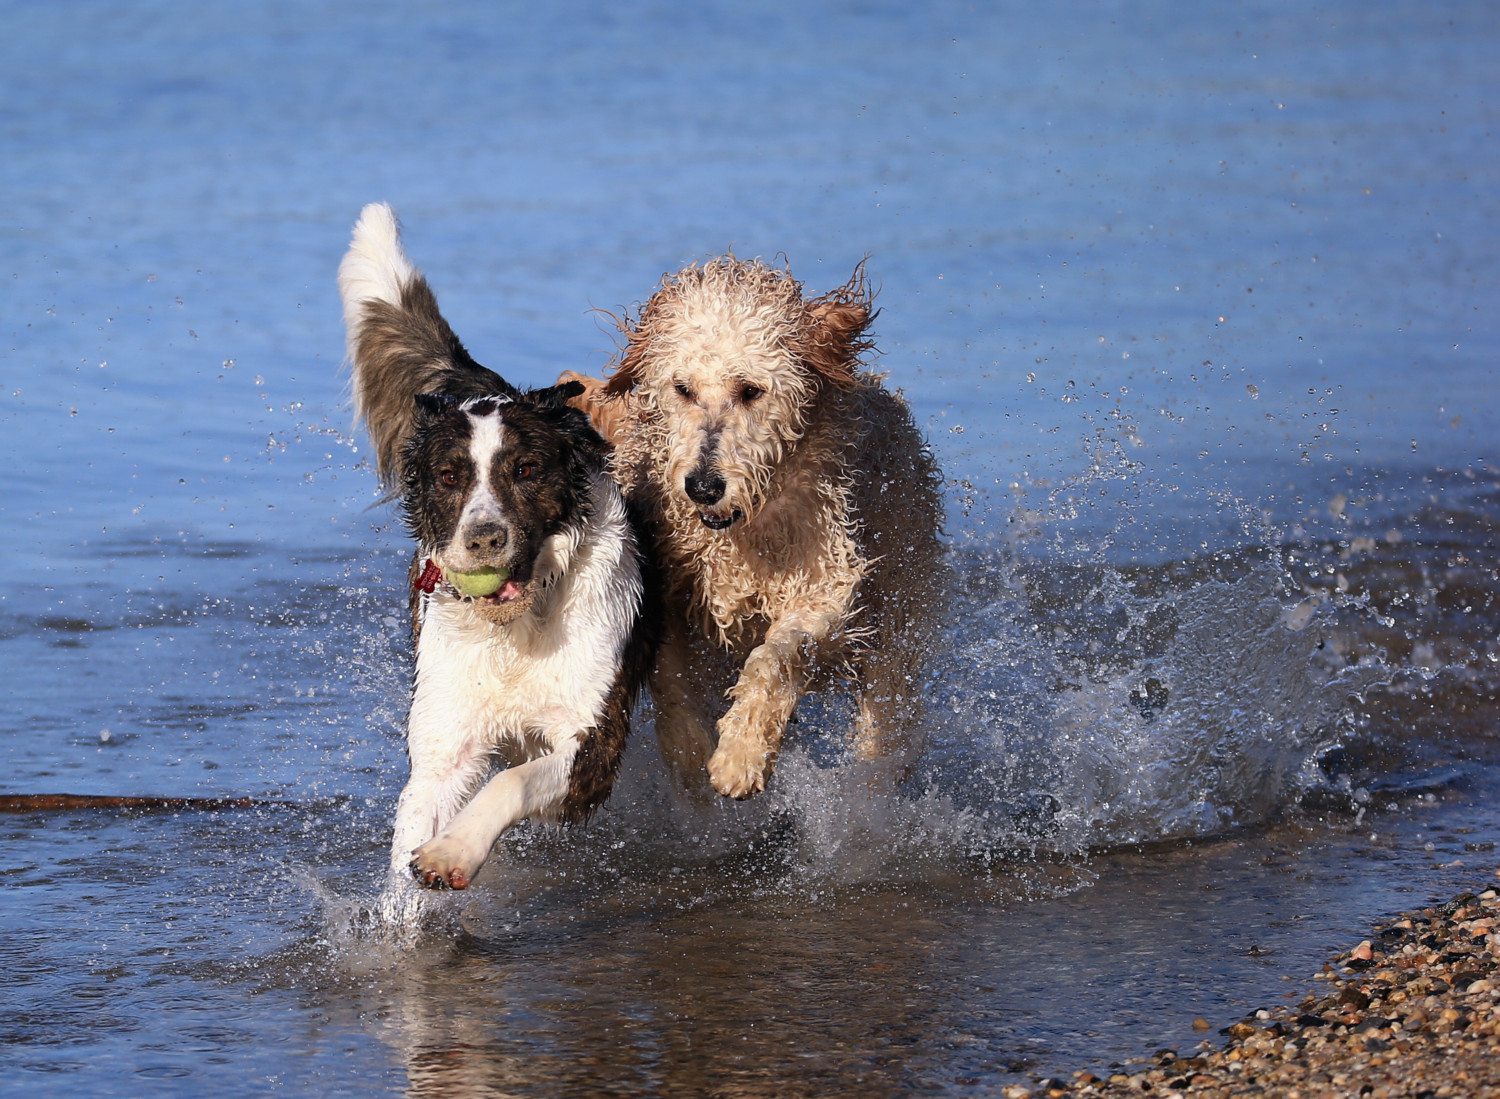 Dogs at Play